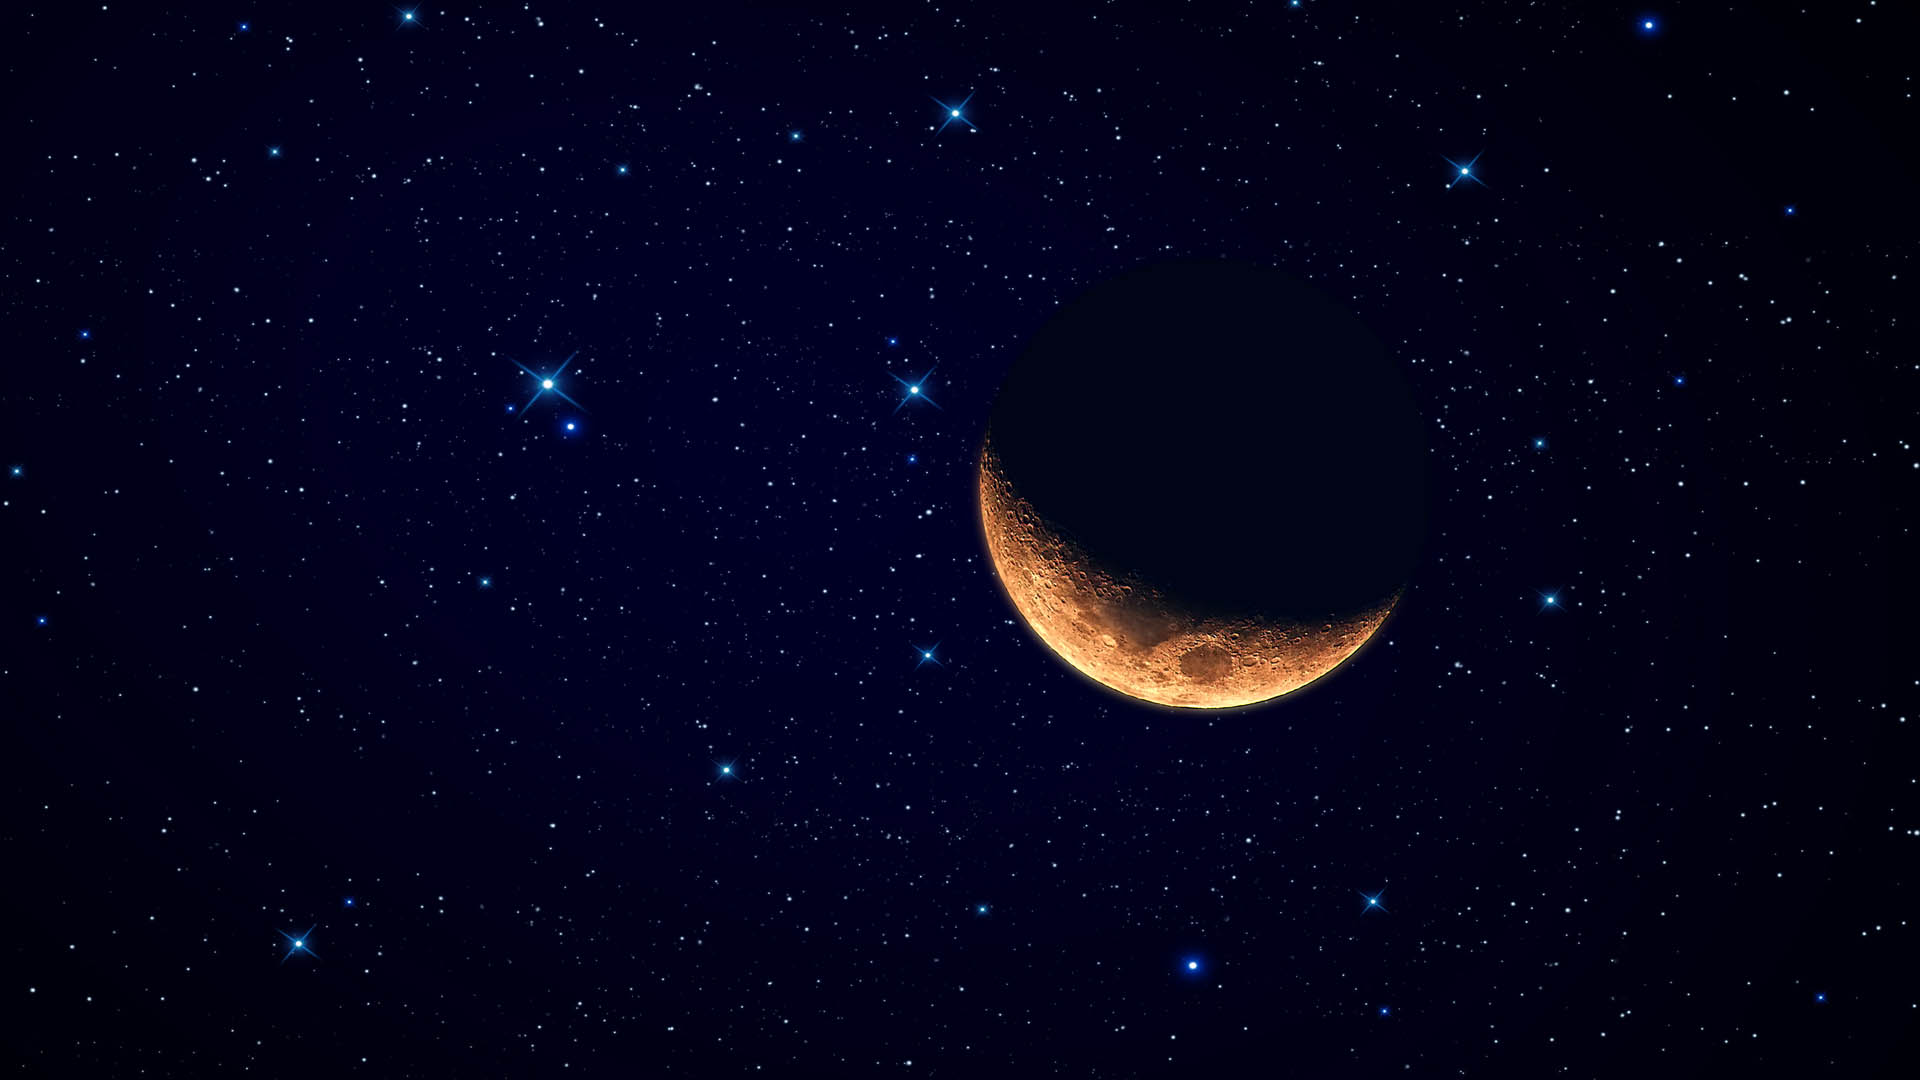  Orange Crescent Moon and Stars Full 1080p Ultra HD Wallpapers